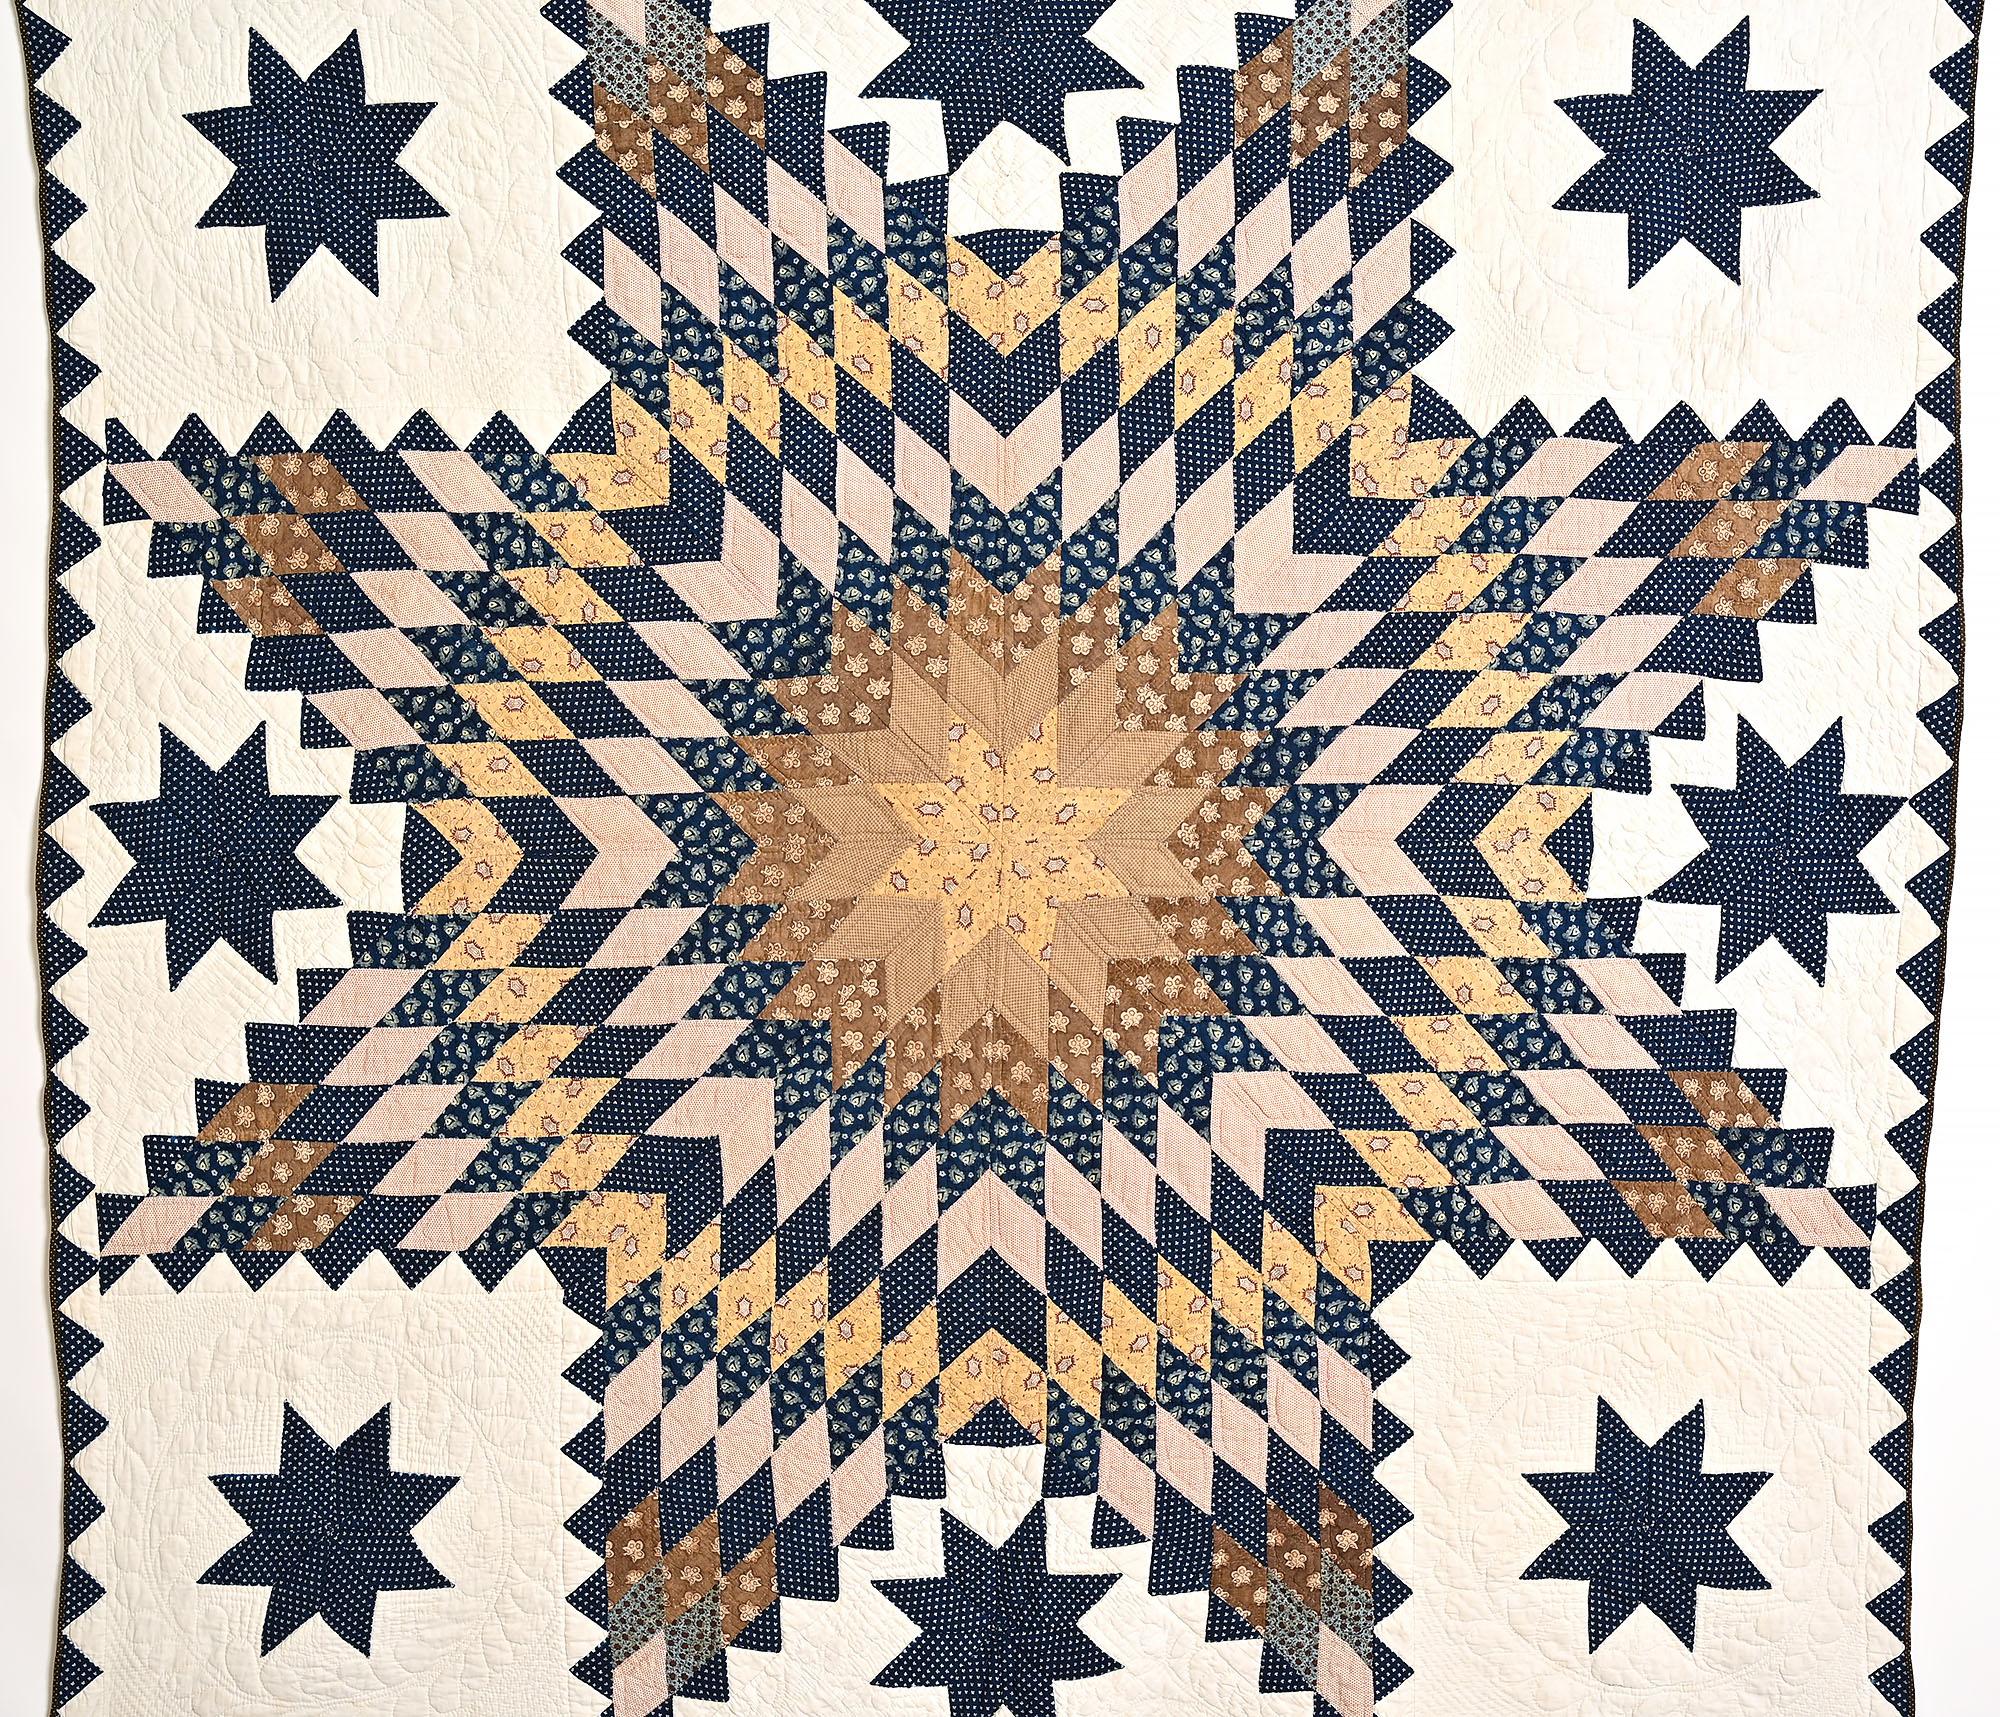 This is a dramatic and unusual variation of a Lone Star Pattern. The triangles, or feathers, around each arm of the star is an unusual feature that makes the quilt appear to pulsate. A quilted wreath frames each of the LeMoyne Stars. Many quilting